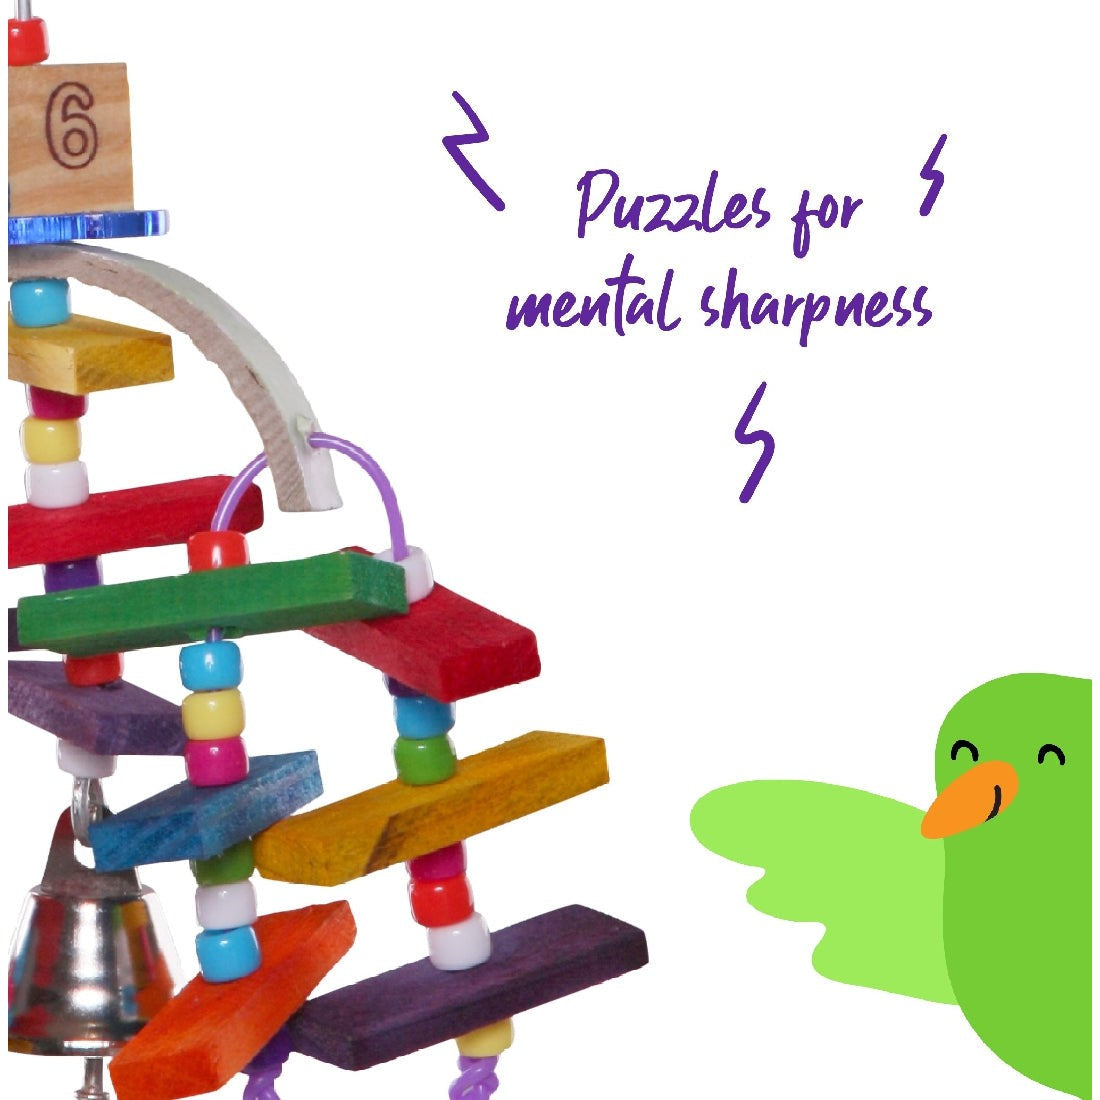 Colorful bird toy with blocks and bell, text "Puzzles for mental sharpness."